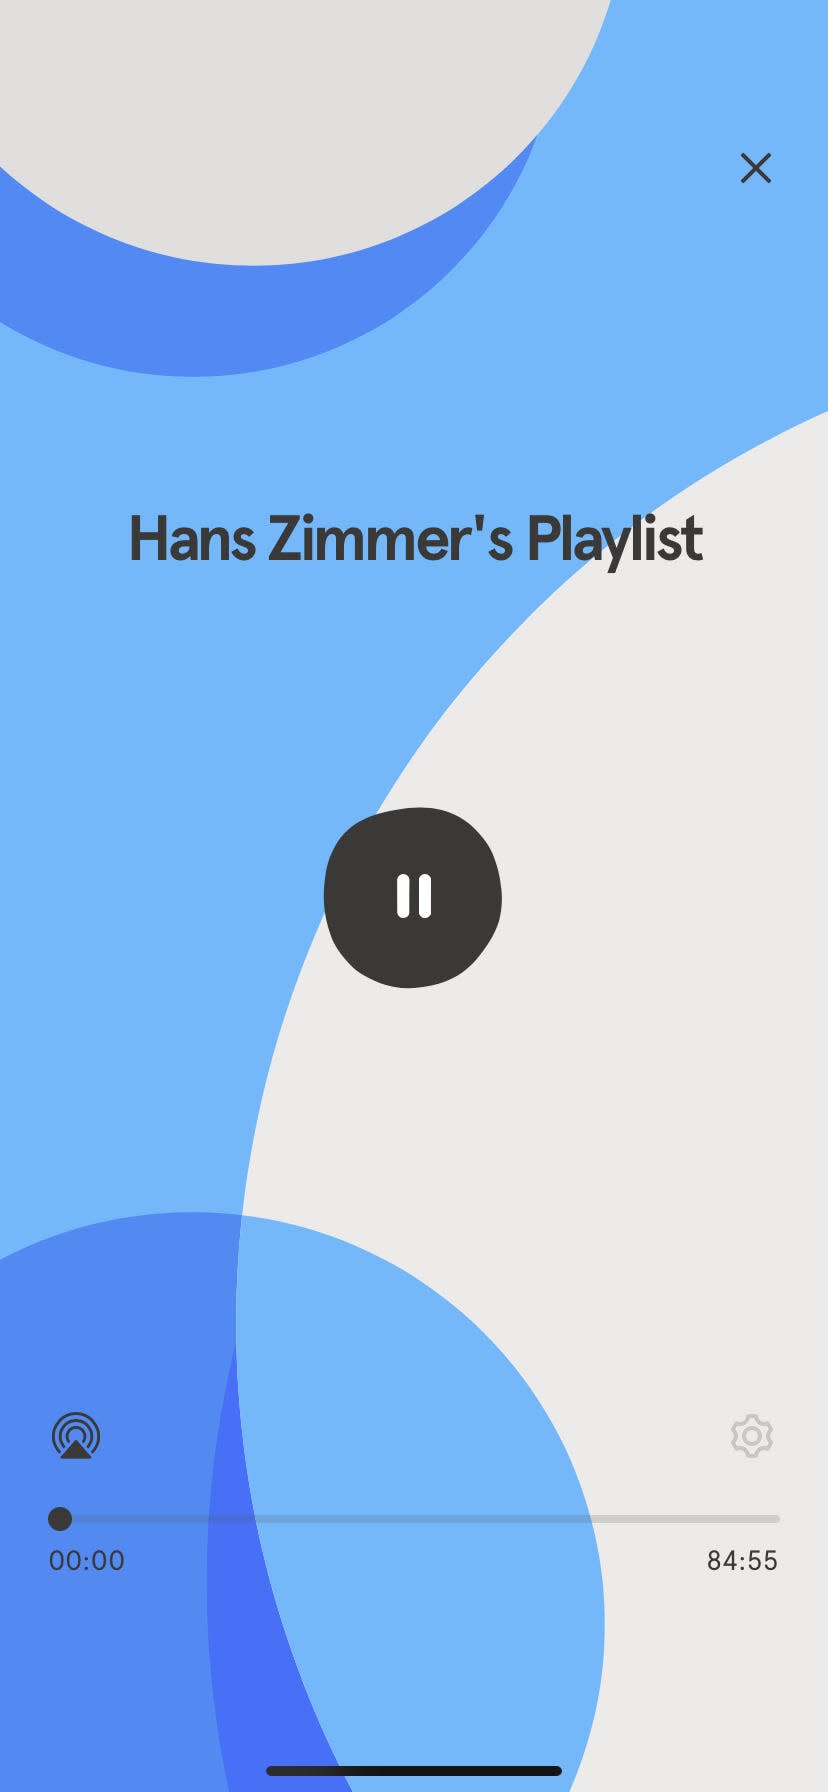 blue and white circles and the words "Hans Zimmer's playlist" in a screenshot of the meditation app Headspace